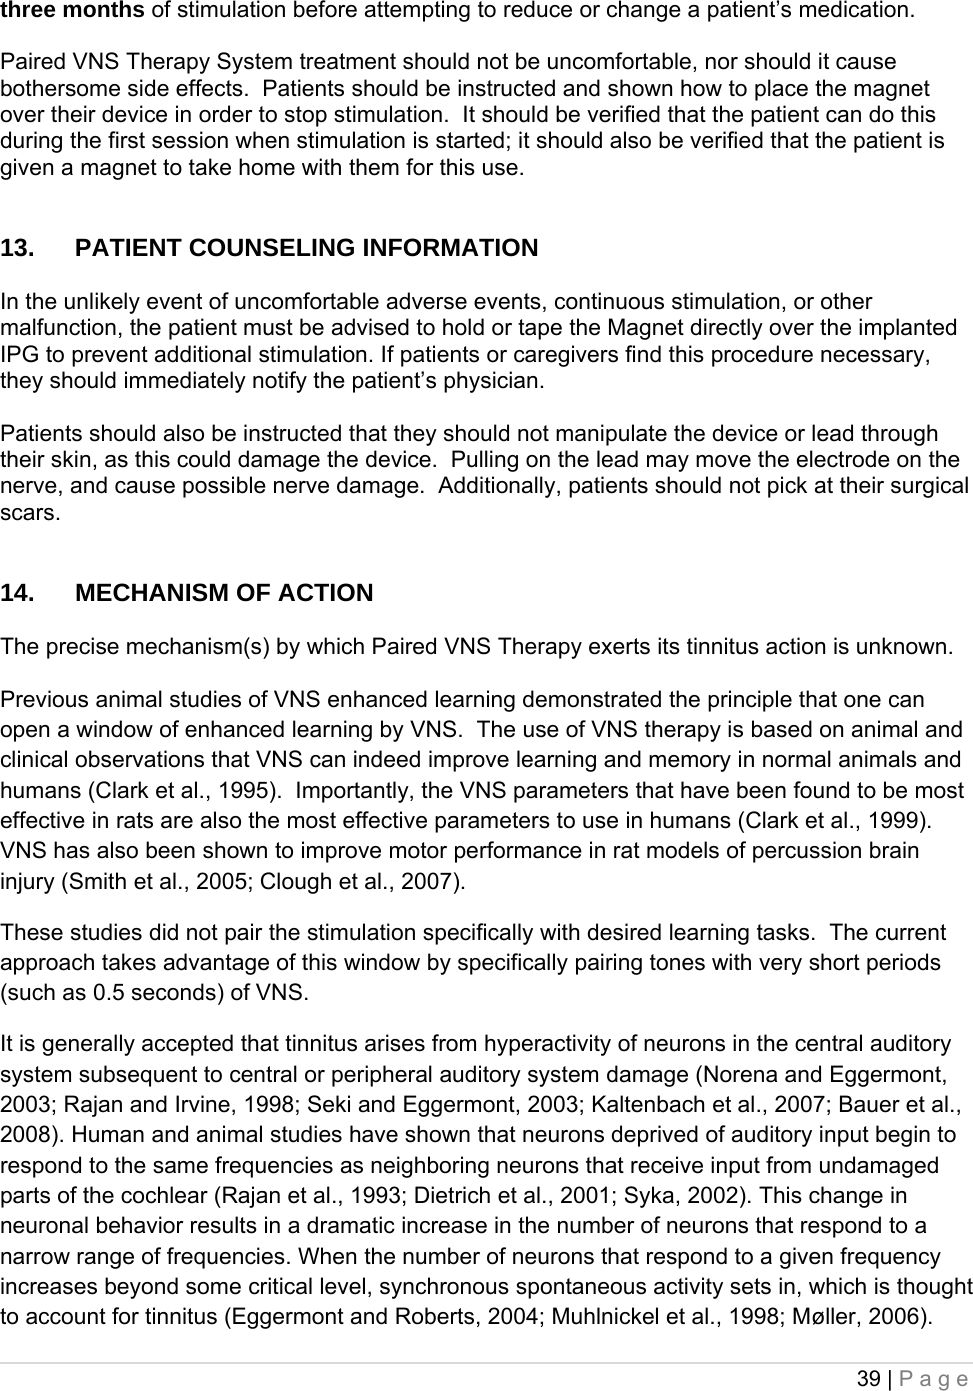 39 | Page  three months of stimulation before attempting to reduce or change a patient’s medication.  Paired VNS Therapy System treatment should not be uncomfortable, nor should it cause bothersome side effects.  Patients should be instructed and shown how to place the magnet over their device in order to stop stimulation.  It should be verified that the patient can do this during the first session when stimulation is started; it should also be verified that the patient is given a magnet to take home with them for this use.   13.  PATIENT COUNSELING INFORMATION   In the unlikely event of uncomfortable adverse events, continuous stimulation, or other malfunction, the patient must be advised to hold or tape the Magnet directly over the implanted IPG to prevent additional stimulation. If patients or caregivers find this procedure necessary, they should immediately notify the patient’s physician.  Patients should also be instructed that they should not manipulate the device or lead through their skin, as this could damage the device.  Pulling on the lead may move the electrode on the nerve, and cause possible nerve damage.  Additionally, patients should not pick at their surgical scars.   14.  MECHANISM OF ACTION  The precise mechanism(s) by which Paired VNS Therapy exerts its tinnitus action is unknown.   Previous animal studies of VNS enhanced learning demonstrated the principle that one can open a window of enhanced learning by VNS.  The use of VNS therapy is based on animal and clinical observations that VNS can indeed improve learning and memory in normal animals and humans (Clark et al., 1995).  Importantly, the VNS parameters that have been found to be most effective in rats are also the most effective parameters to use in humans (Clark et al., 1999).  VNS has also been shown to improve motor performance in rat models of percussion brain injury (Smith et al., 2005; Clough et al., 2007). These studies did not pair the stimulation specifically with desired learning tasks.  The current approach takes advantage of this window by specifically pairing tones with very short periods (such as 0.5 seconds) of VNS.  It is generally accepted that tinnitus arises from hyperactivity of neurons in the central auditory system subsequent to central or peripheral auditory system damage (Norena and Eggermont, 2003; Rajan and Irvine, 1998; Seki and Eggermont, 2003; Kaltenbach et al., 2007; Bauer et al., 2008). Human and animal studies have shown that neurons deprived of auditory input begin to respond to the same frequencies as neighboring neurons that receive input from undamaged parts of the cochlear (Rajan et al., 1993; Dietrich et al., 2001; Syka, 2002). This change in neuronal behavior results in a dramatic increase in the number of neurons that respond to a narrow range of frequencies. When the number of neurons that respond to a given frequency increases beyond some critical level, synchronous spontaneous activity sets in, which is thought to account for tinnitus (Eggermont and Roberts, 2004; Muhlnickel et al., 1998; Møller, 2006). 